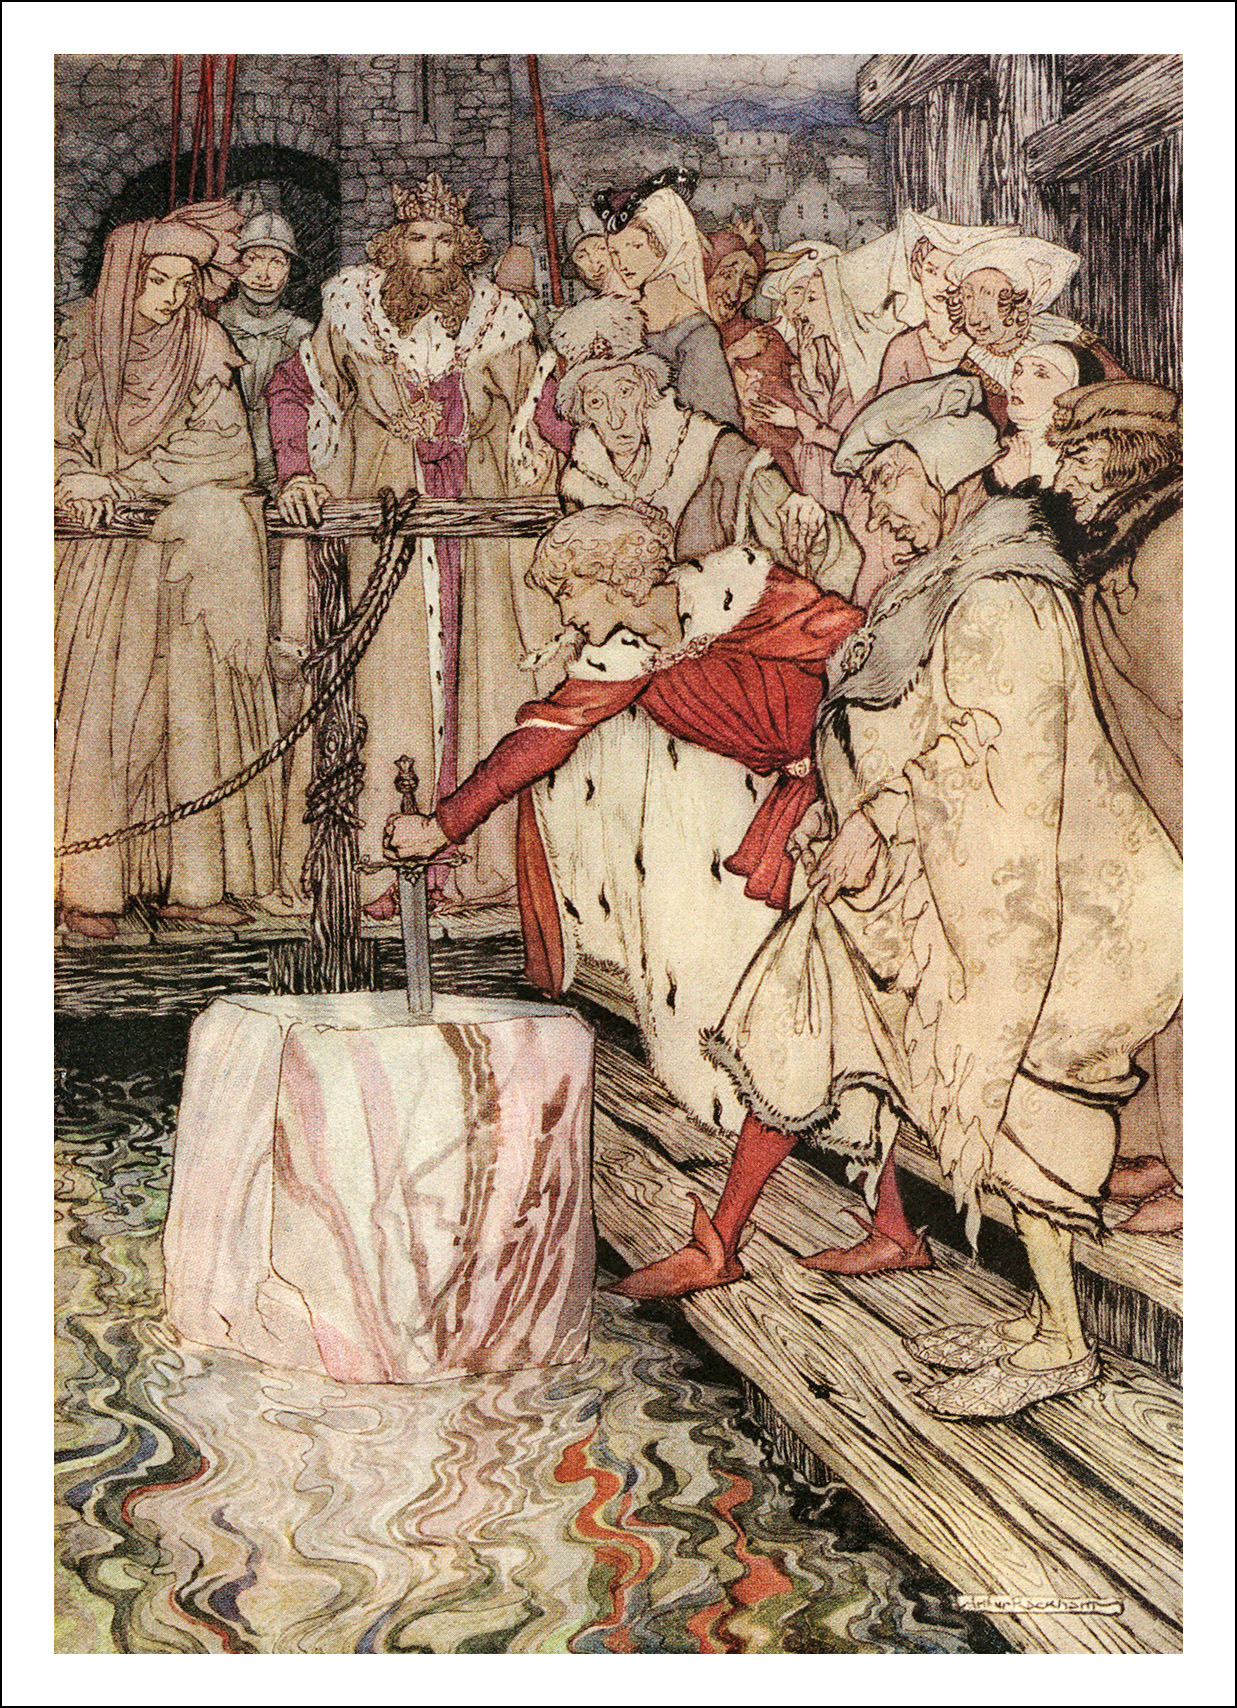 Arthur Rackham, The romance of King Arthur and his knights of the Round Table